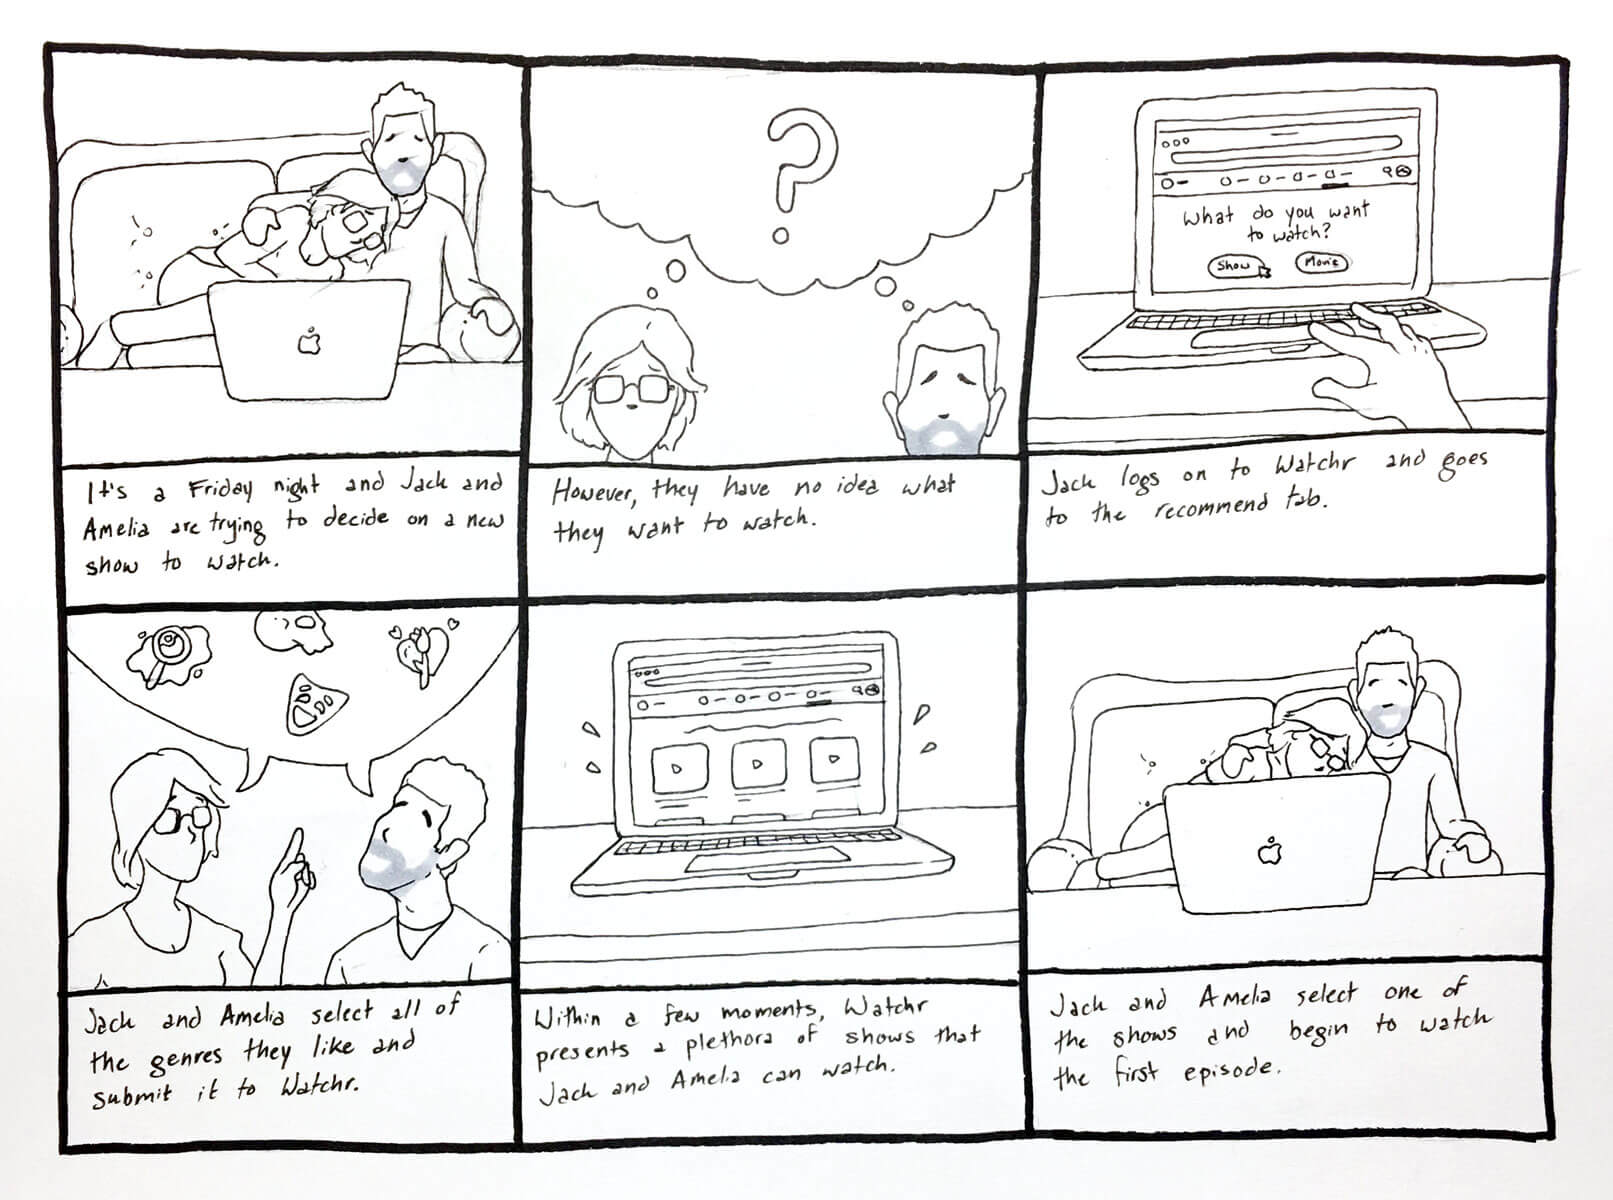 A hand-drawn storyboard with six panels. Each panel features an image with a caption below it.